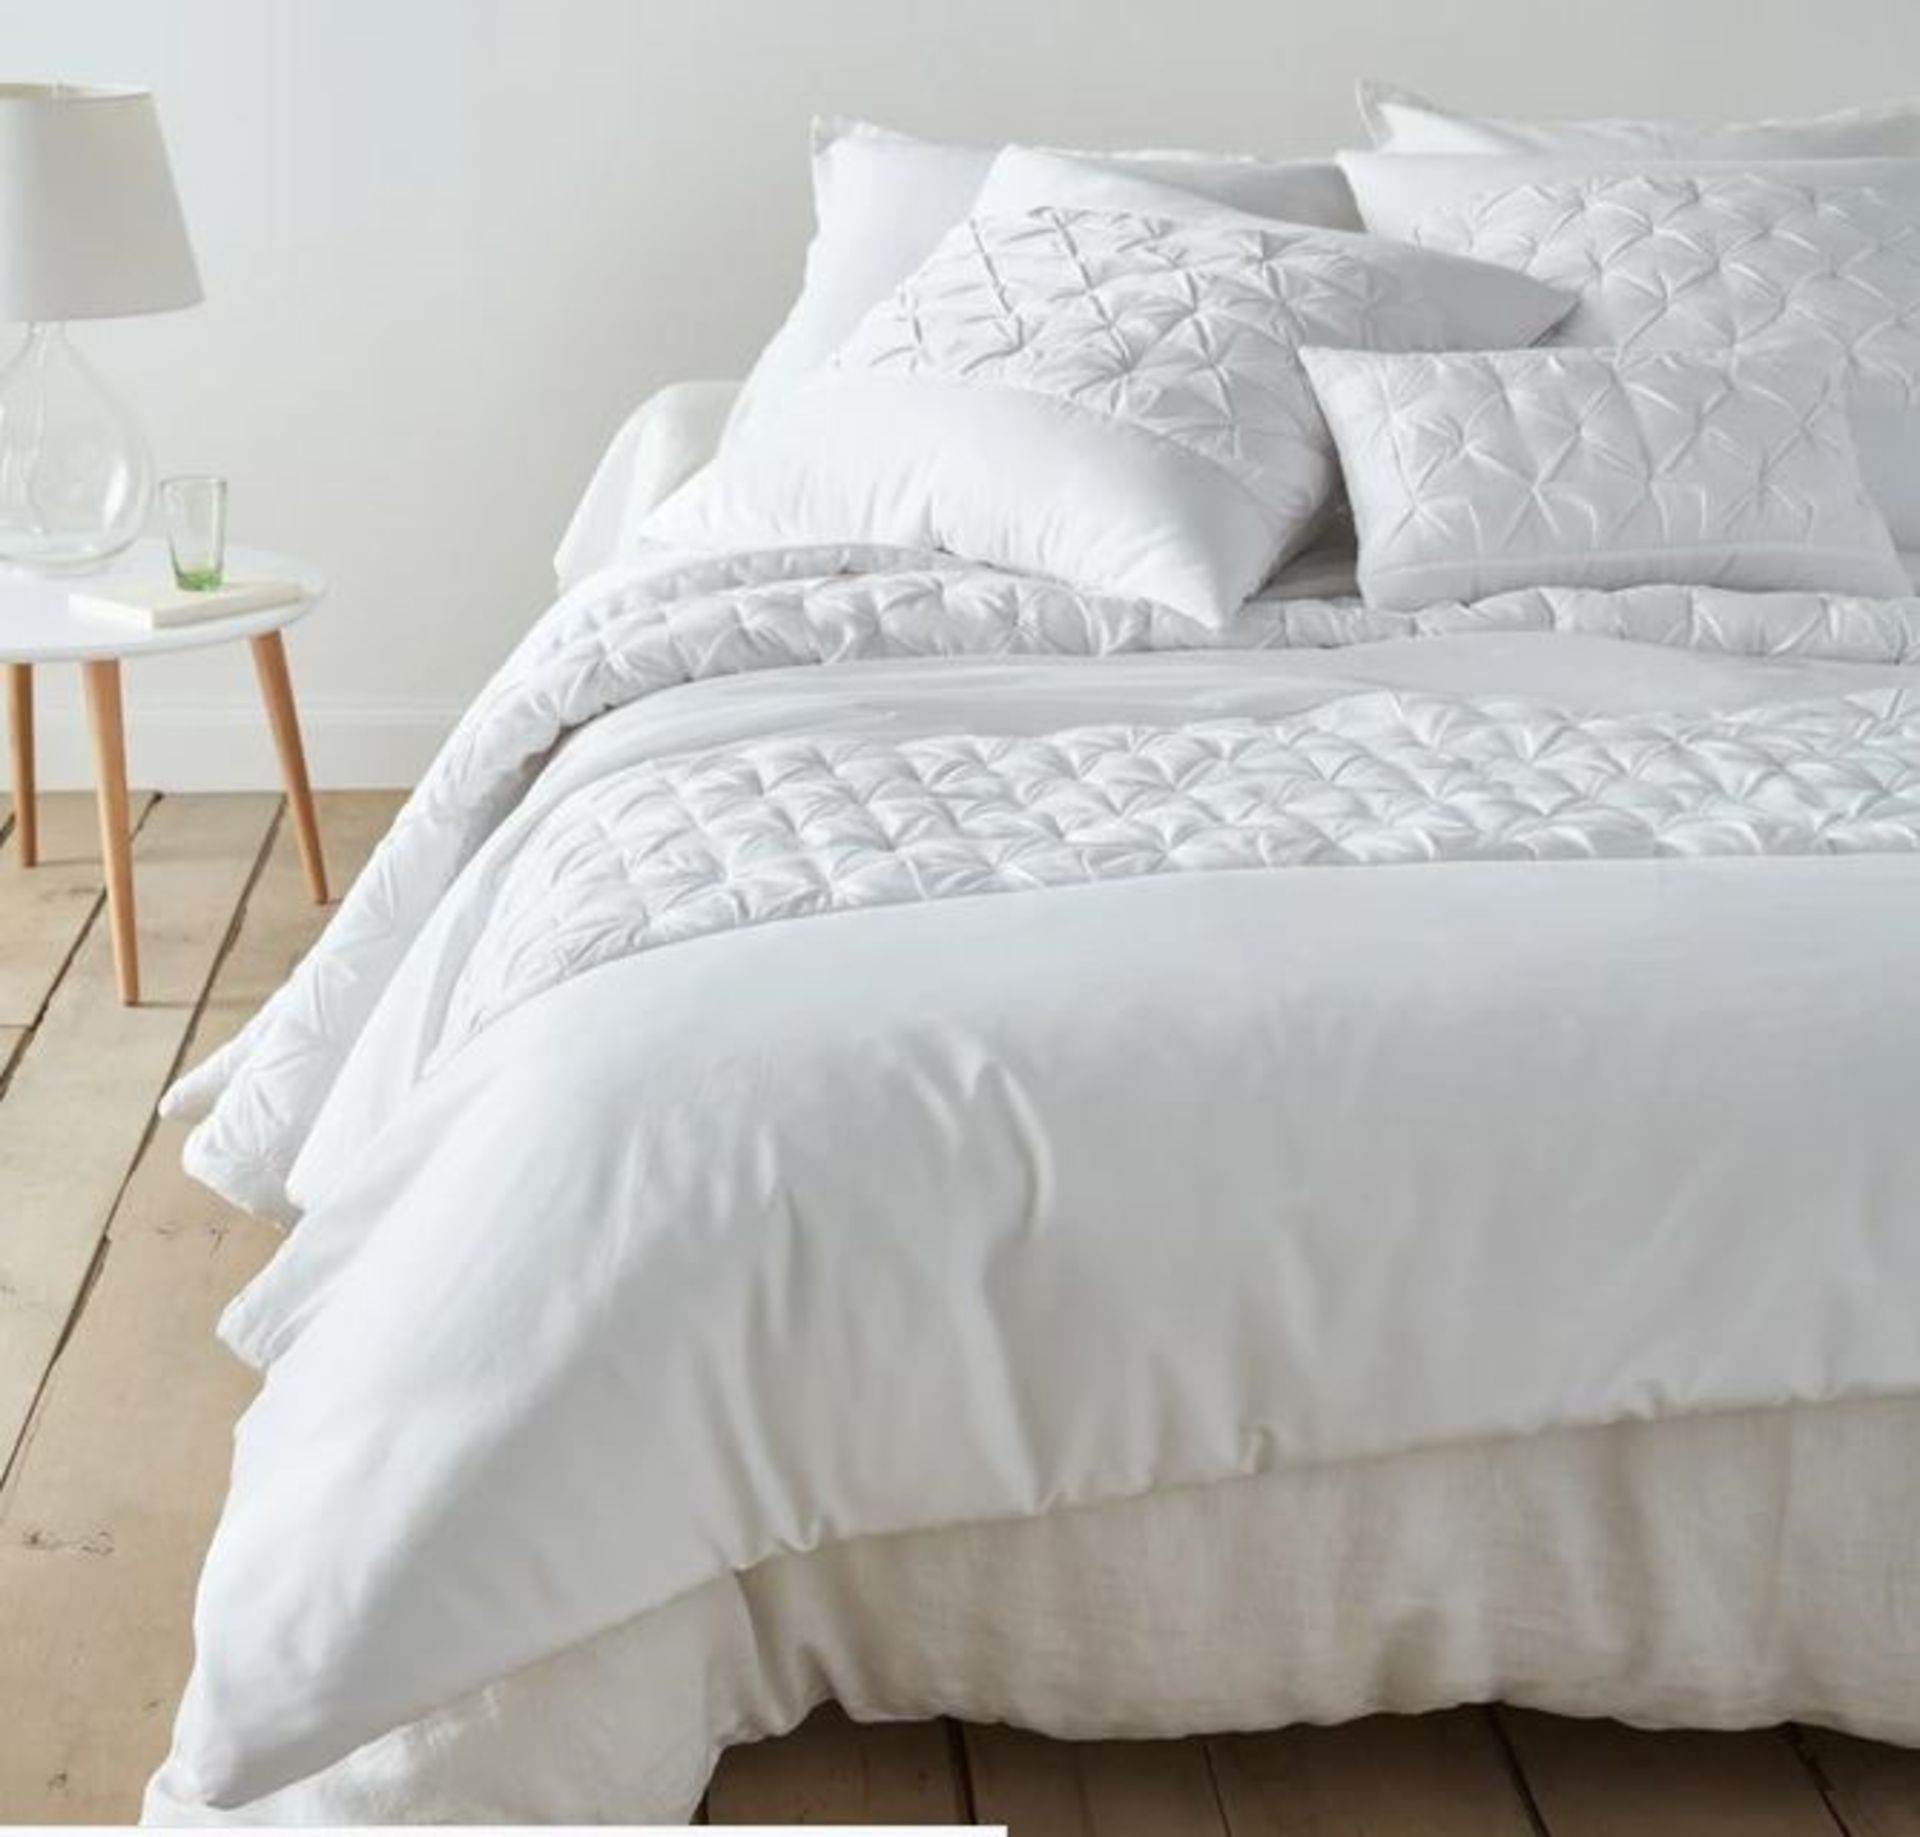 1 BAGGED GRADE A KHIN COTTON SATIN QUILTED BEDSPREAD IN WHITE / SIZE; 180 X 230CM / RRP £125.00 (